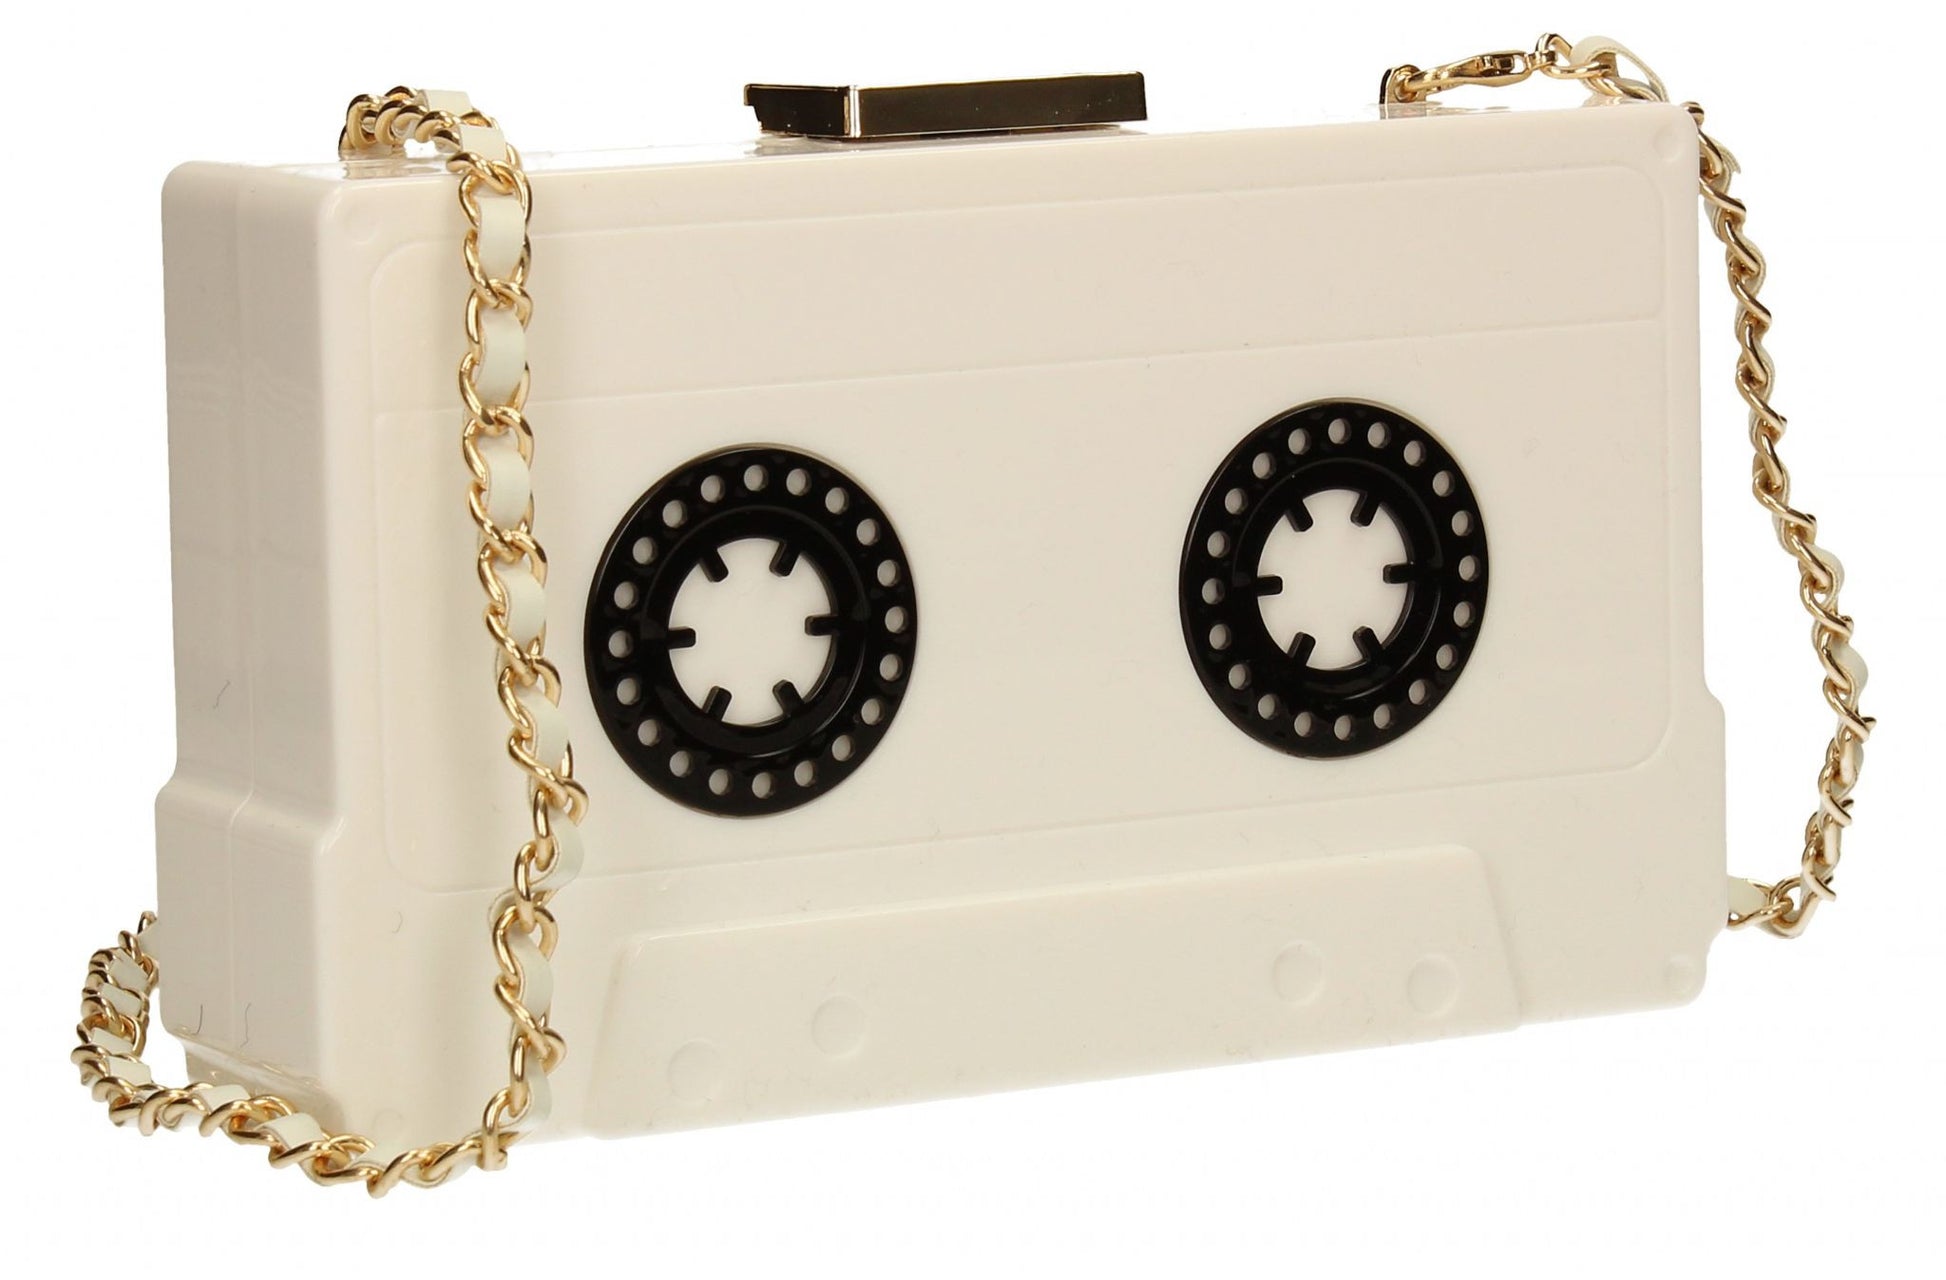 SWANKYSWANS Rita Quirky Cassette style Box Clutch White Cute Cheap Clutch Bag For Weddings School and Work